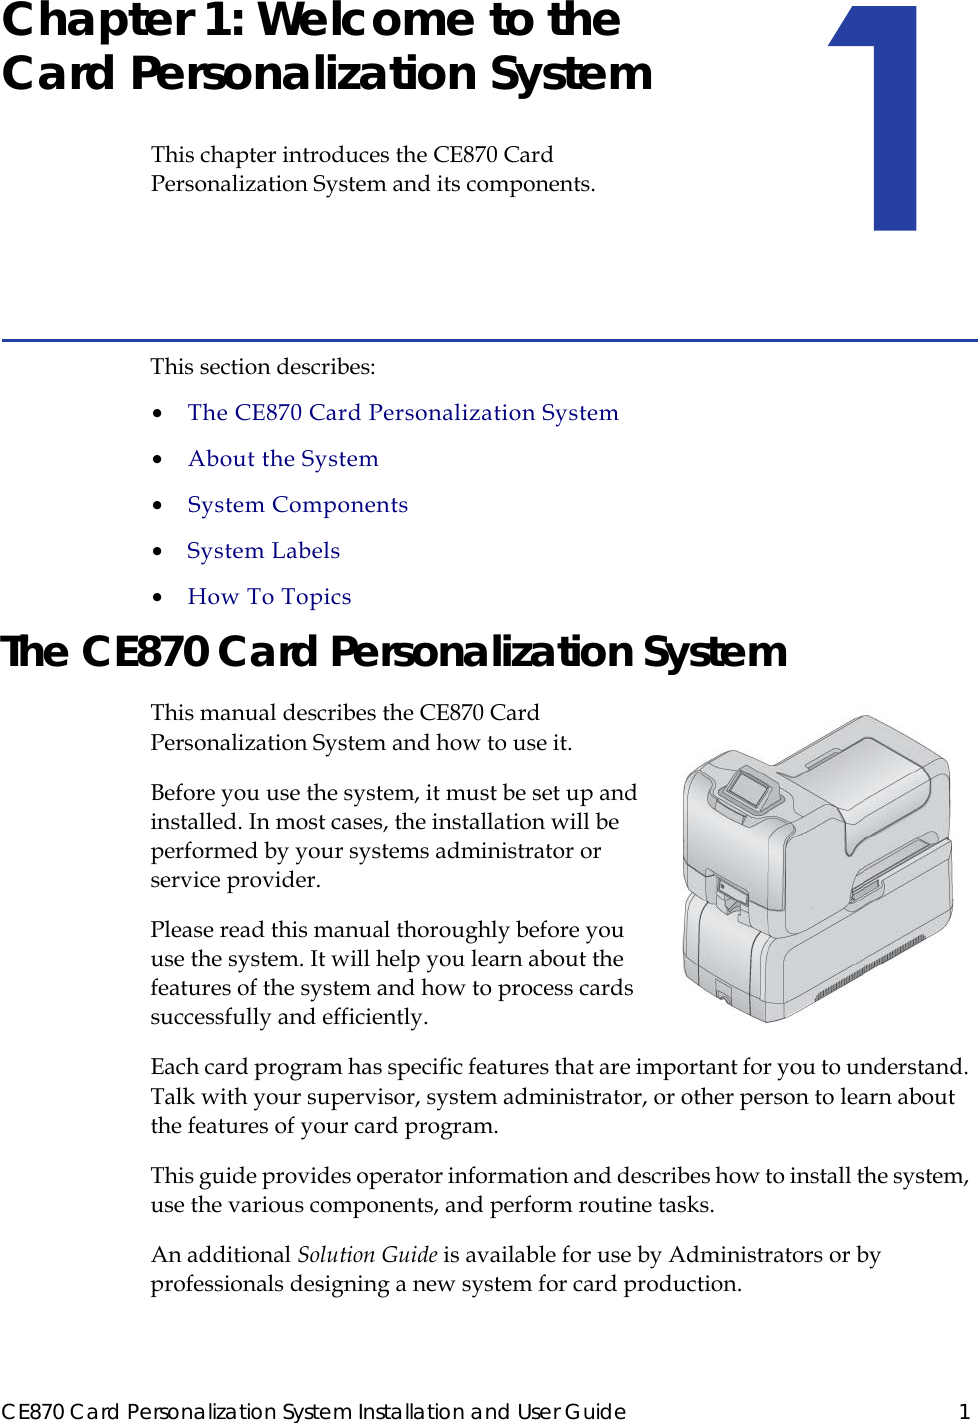 CE870 Card Personalization System Installation and User Guide 1Chapter 1: Welcome to the Card Personalization SystemThis chapter introduces the CE870 Card Personalization System and its components.This section describes:•  The CE870 Card Personalization System•  About the System•  System Components•  System Labels•  How To TopicsThe CE870 Card Personalization SystemThis manual describes the CE870 Card Personalization System and how to use it. Before you use the system, it must be set up and installed. In most cases, the installation will be performed by your systems administrator or service provider. Please read this manual thoroughly before you use the system. It will help you learn about the features of the system and how to process cards successfully and efficiently.Each card program has specific features that are important for you to understand. Talk with your supervisor, system administrator, or other person to learn about the features of your card program. This guide provides operator information and describes how to install the system, use the various components, and perform routine tasks. An additional Solution Guide is available for use by Administrators or by professionals designing a new system for card production.